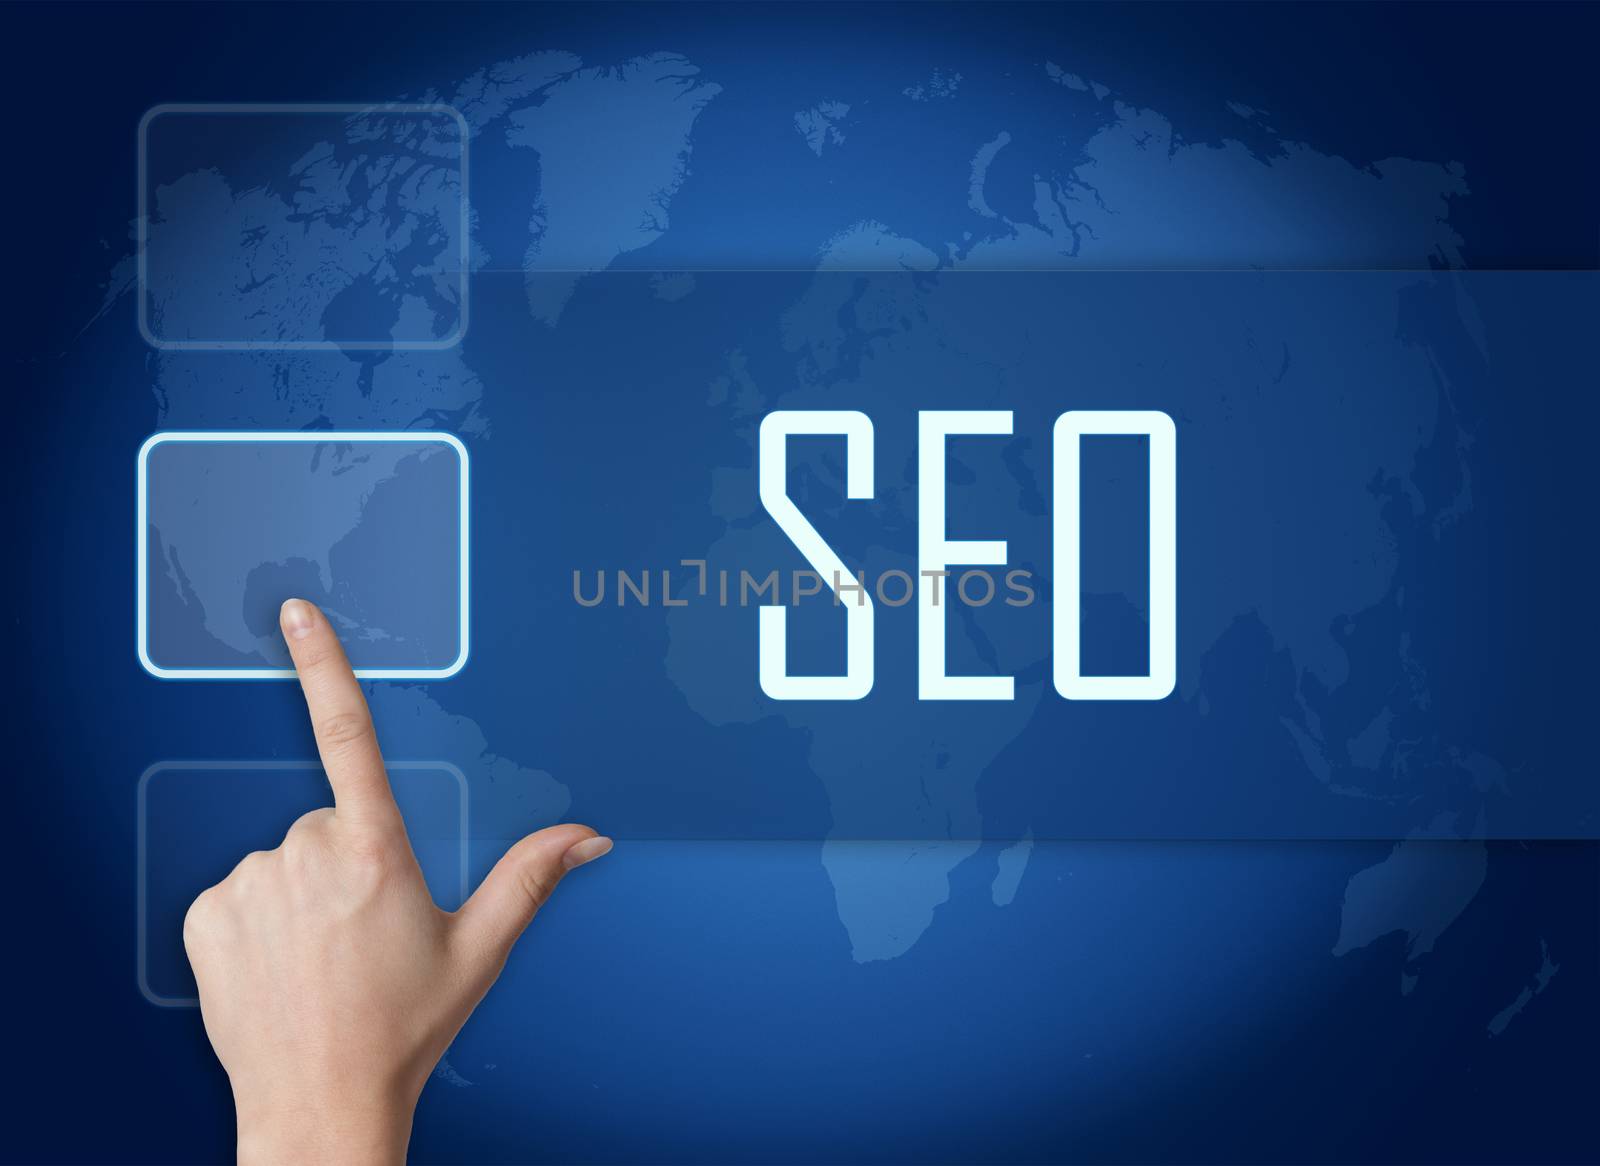 Search Engine Optimization concept with interface and world map on blue background